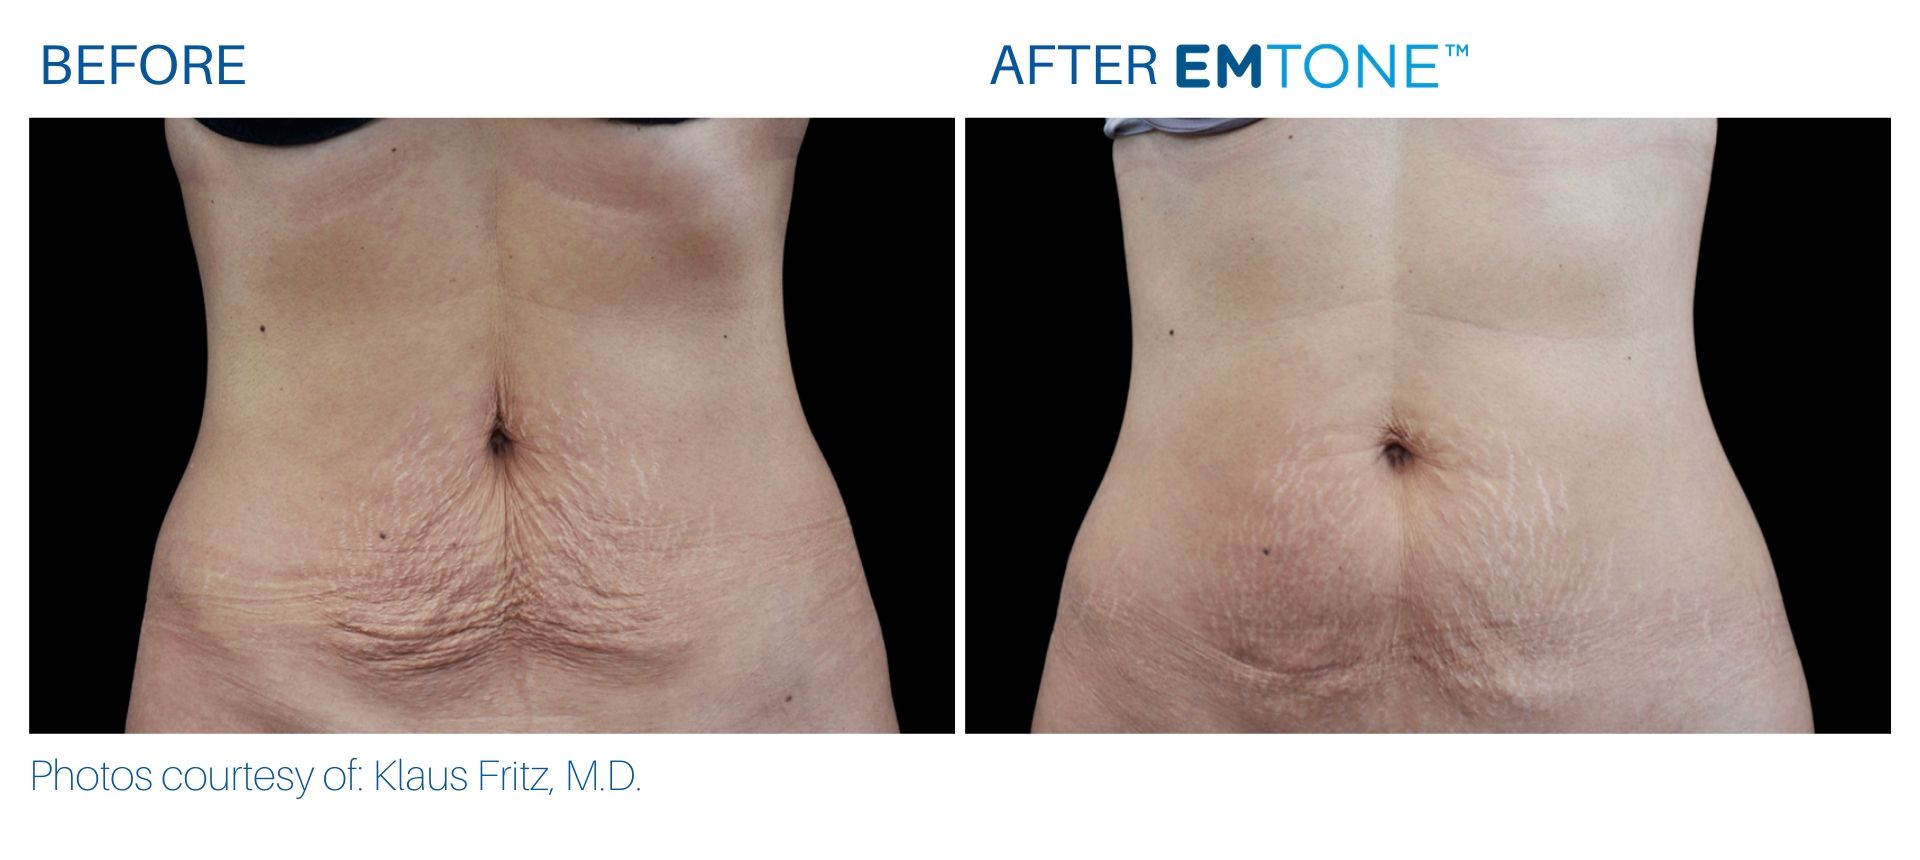 emtone_before_and_after_bodymorphmd_2